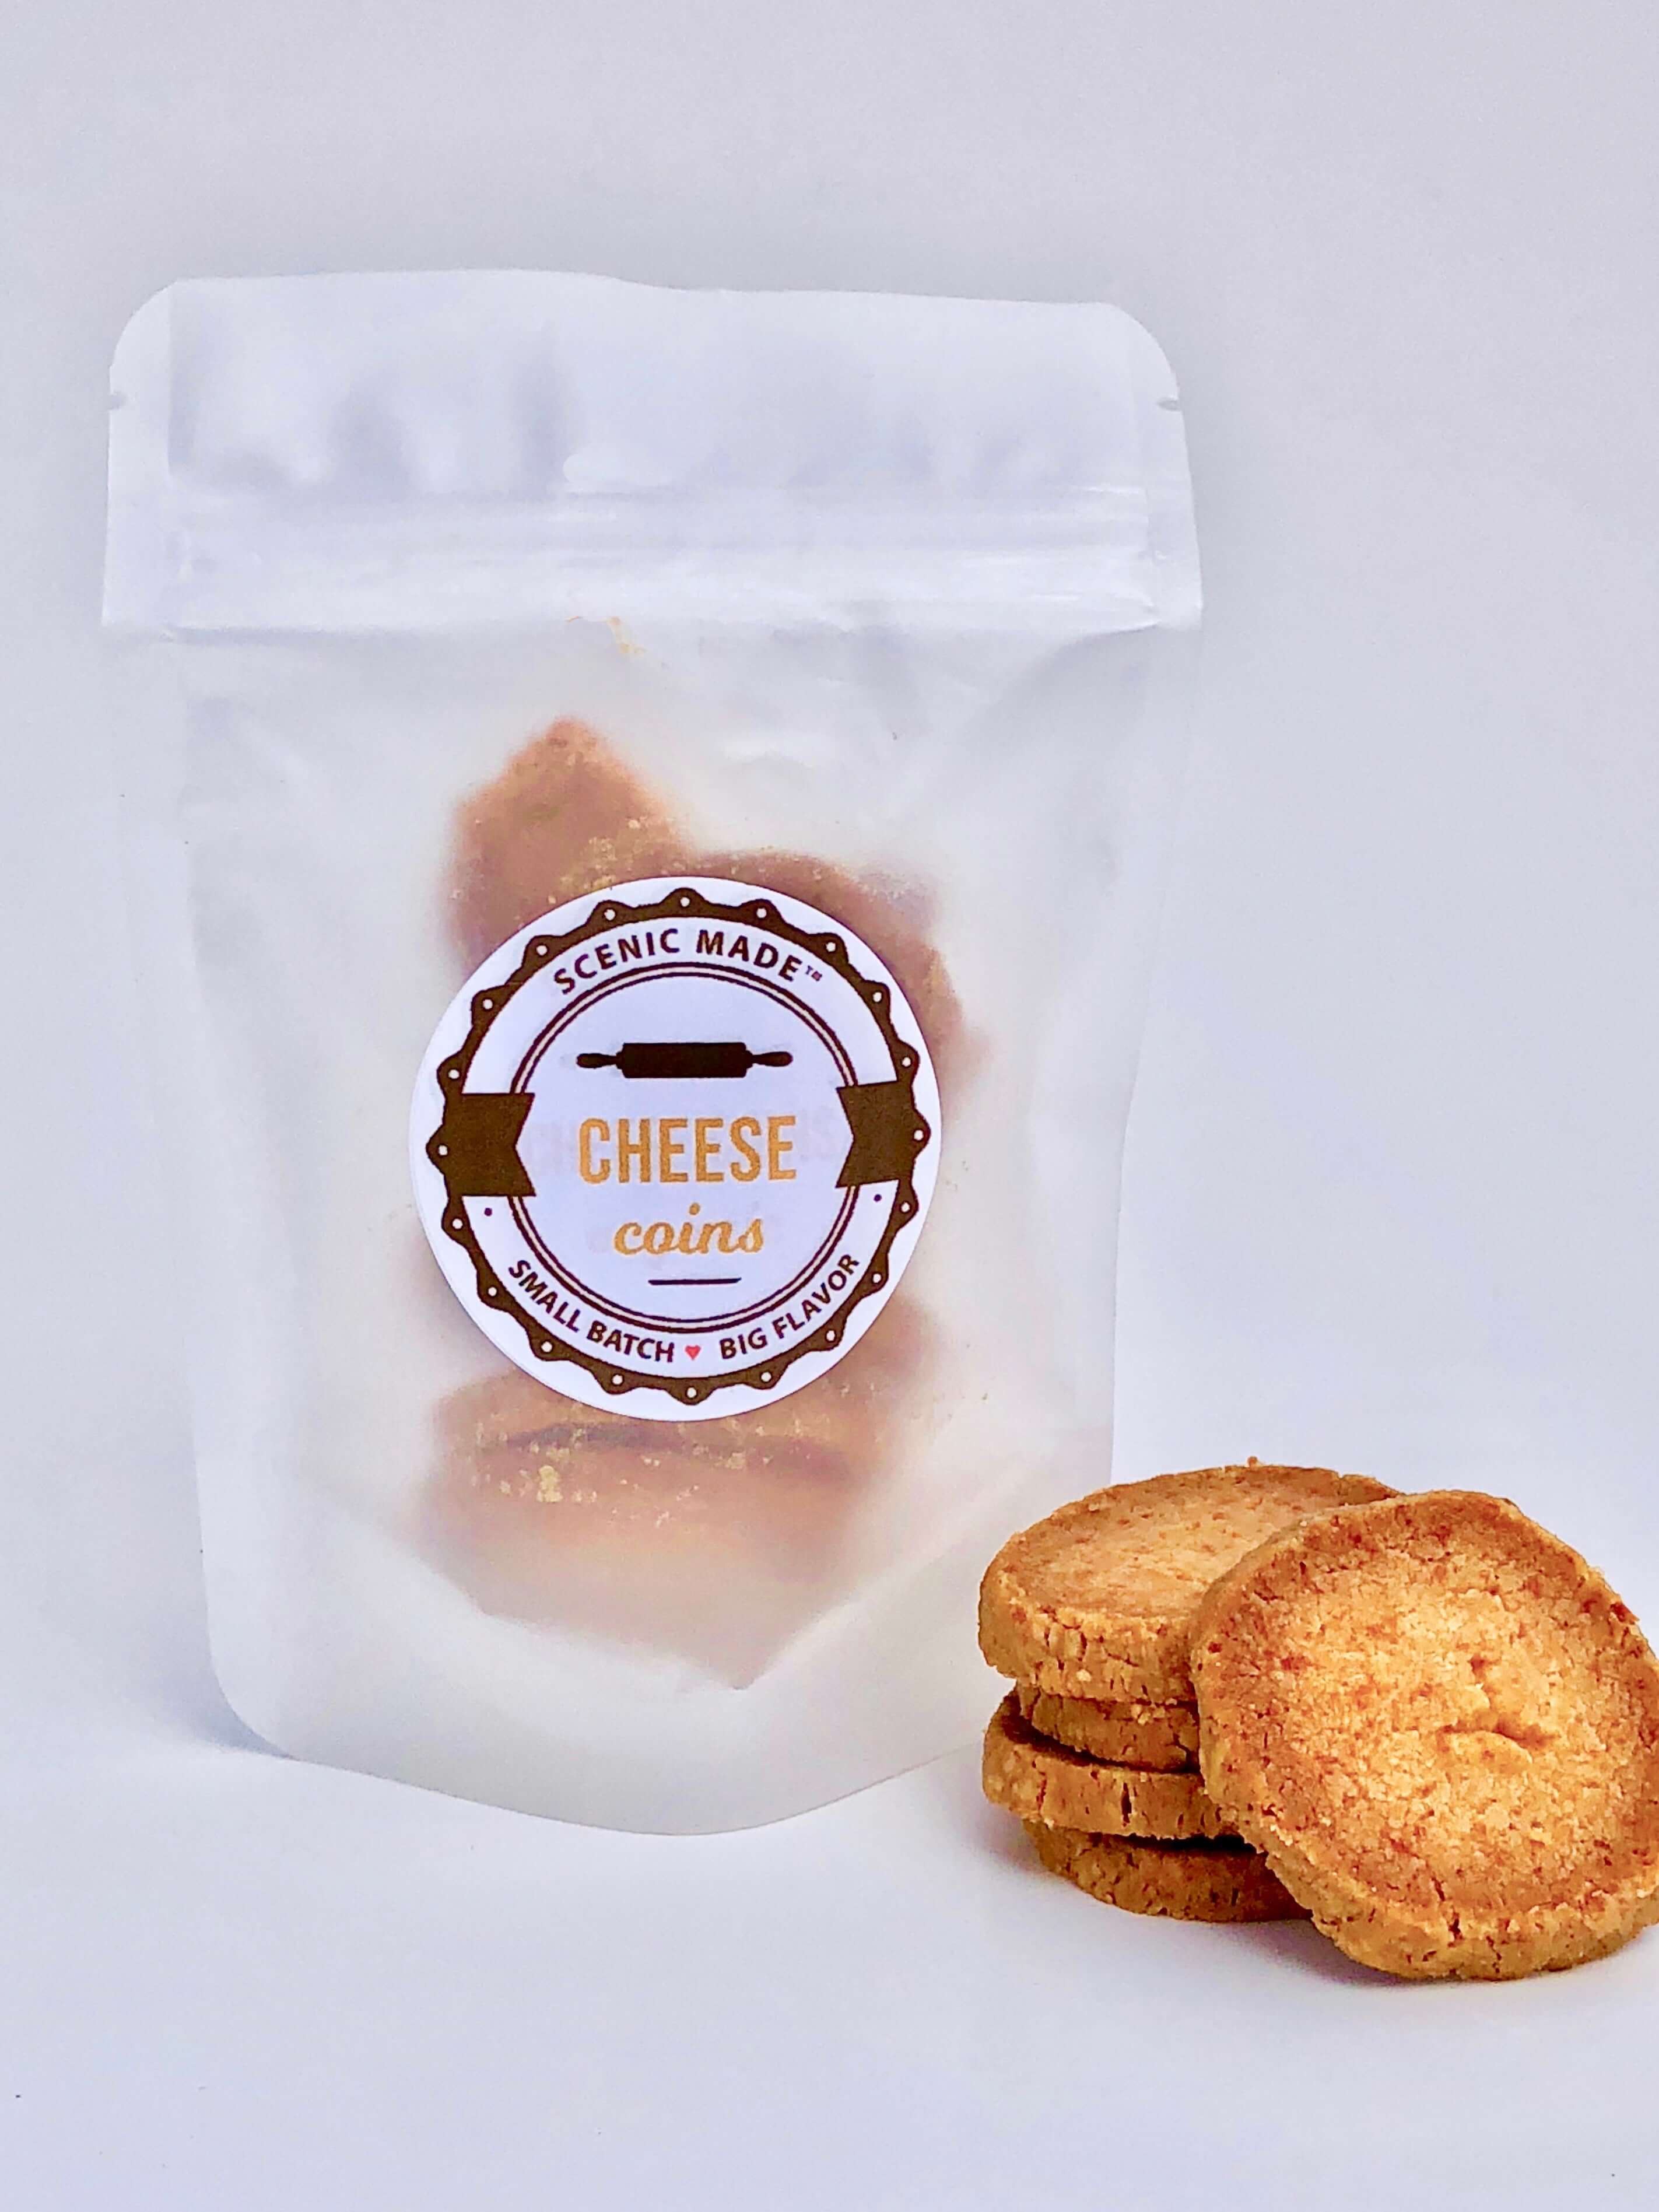 Cheese coins.  8 crackers made with organic cheddar cheese.  Packaged in a translucent, resealable bag with an attractive label on the front.